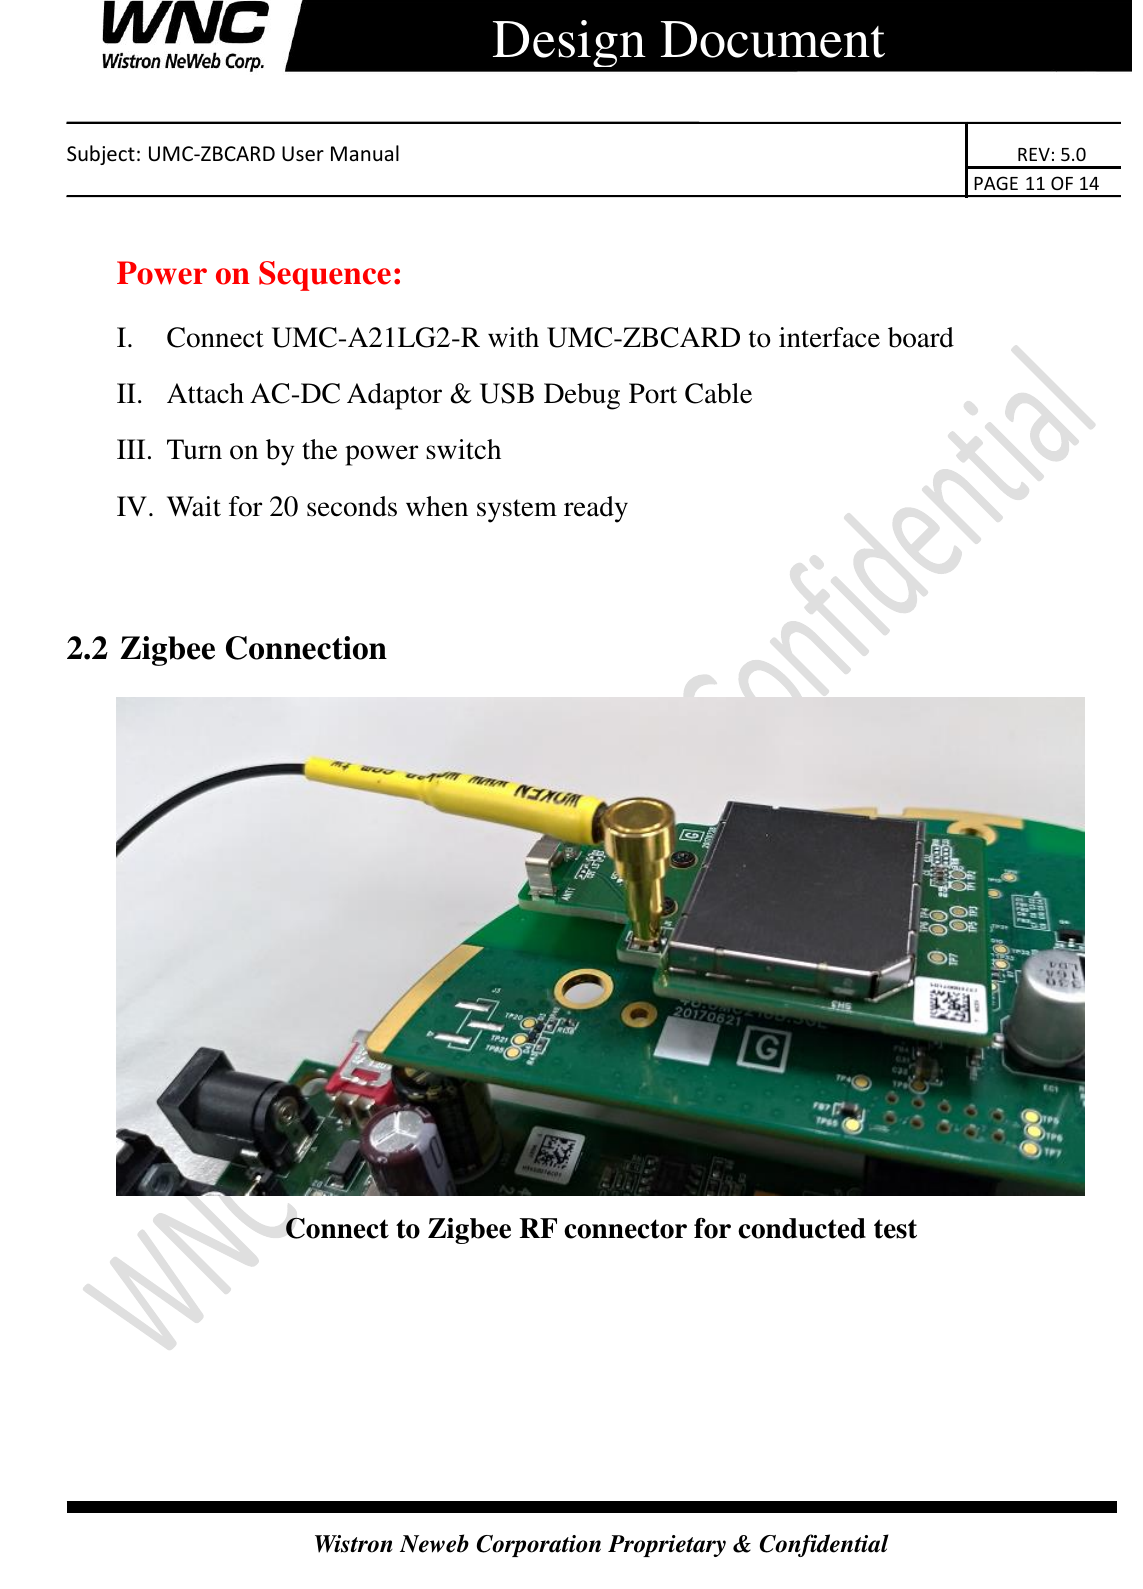    Subject: UMC-ZBCARD User Manual                                                                      REV: 5.0                                                                                        PAGE 11 OF 14  Wistron Neweb Corporation Proprietary &amp; Confidential      Design Document  Power on Sequence: I. Connect UMC-A21LG2-R with UMC-ZBCARD to interface board II. Attach AC-DC Adaptor &amp; USB Debug Port Cable III. Turn on by the power switch IV. Wait for 20 seconds when system ready  2.2 Zigbee Connection  Connect to Zigbee RF connector for conducted test    